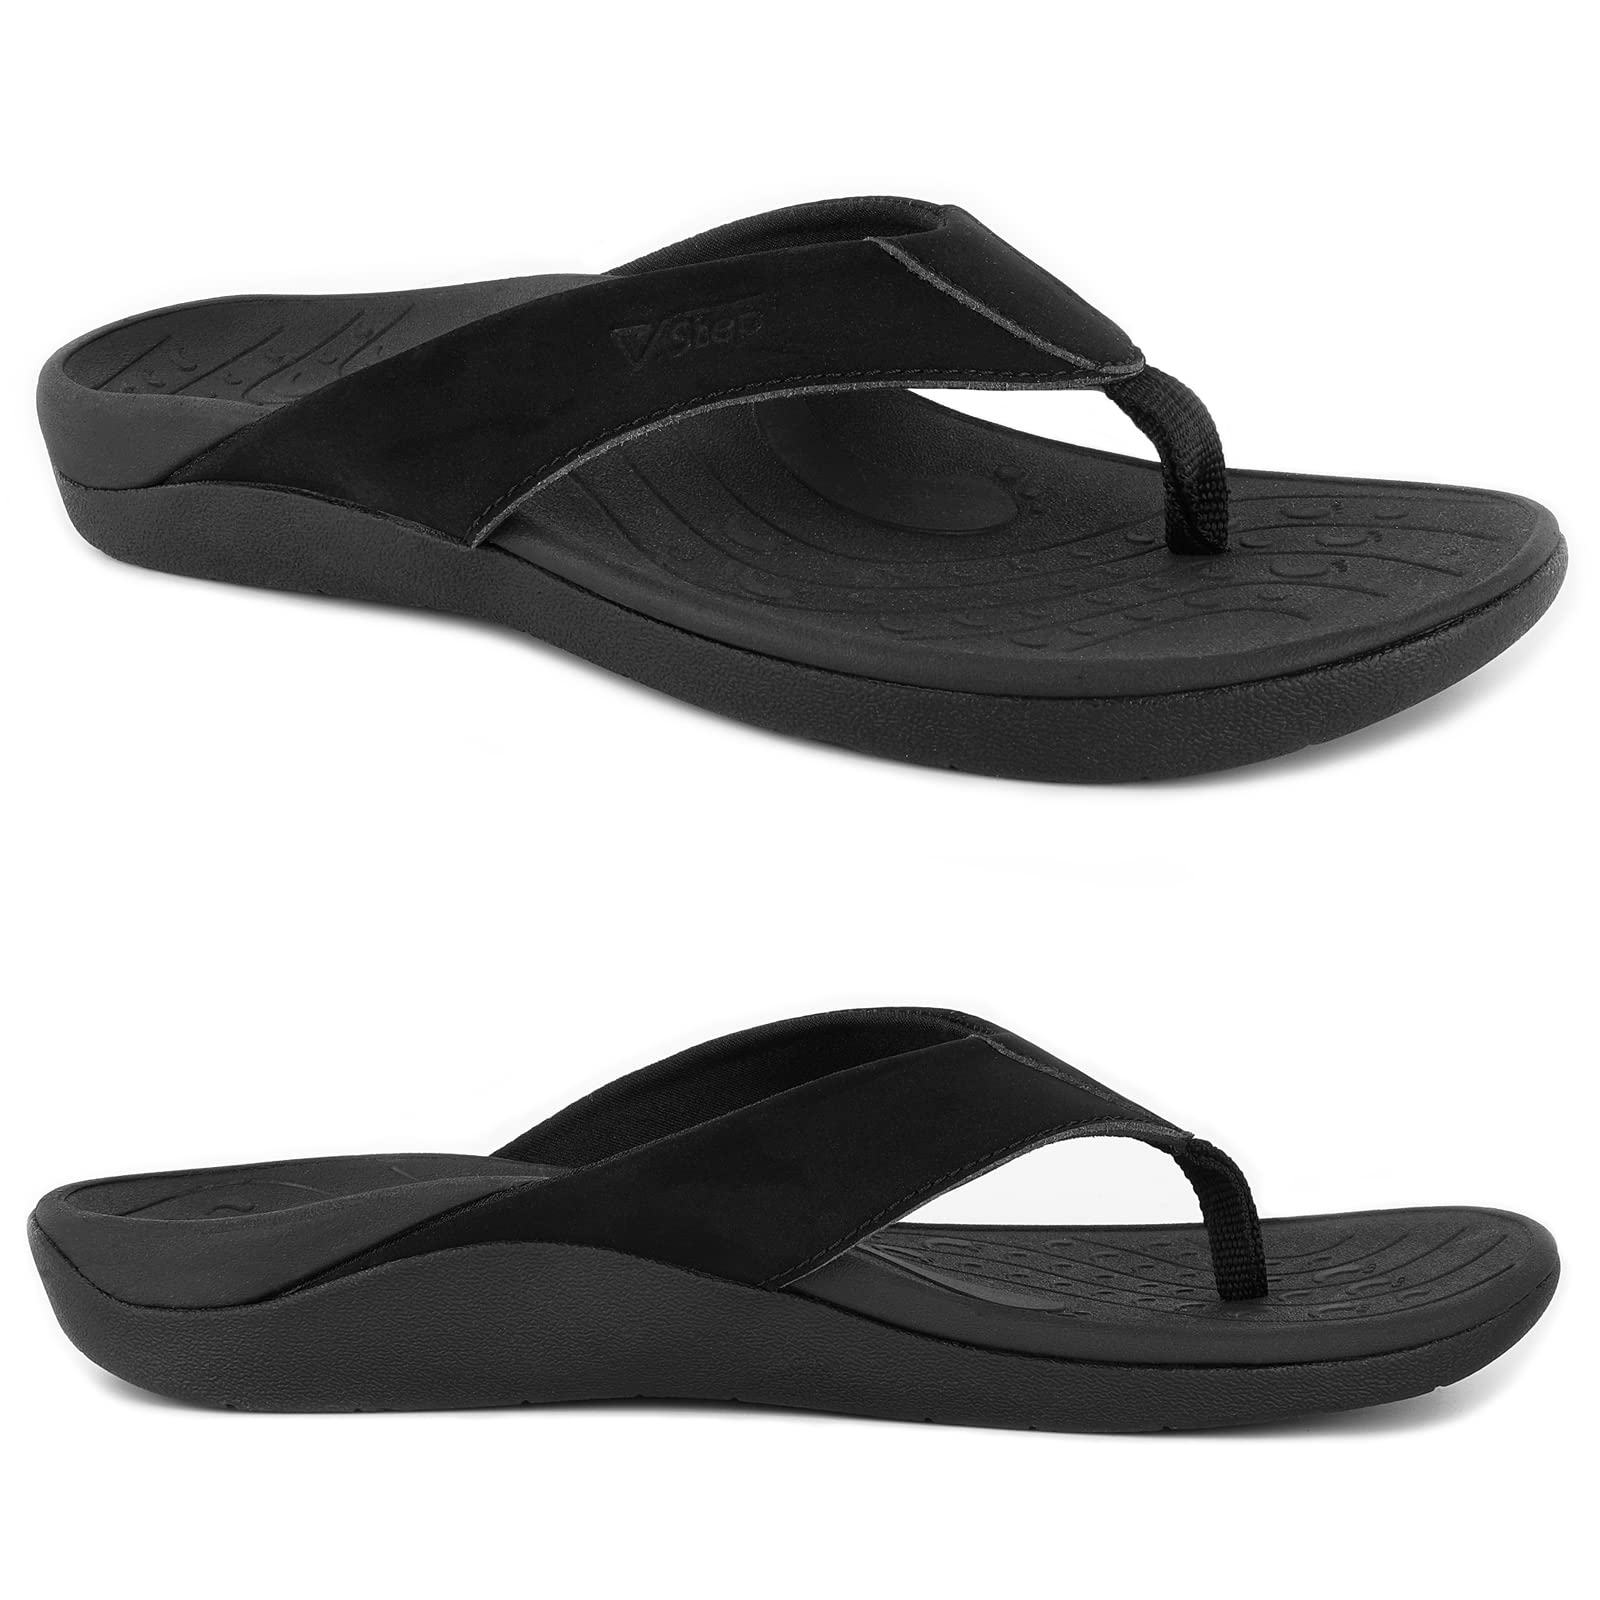  ARCHIES Footwear - Flip Flop Sandals Offering Great Arch  Support And Comfort - White